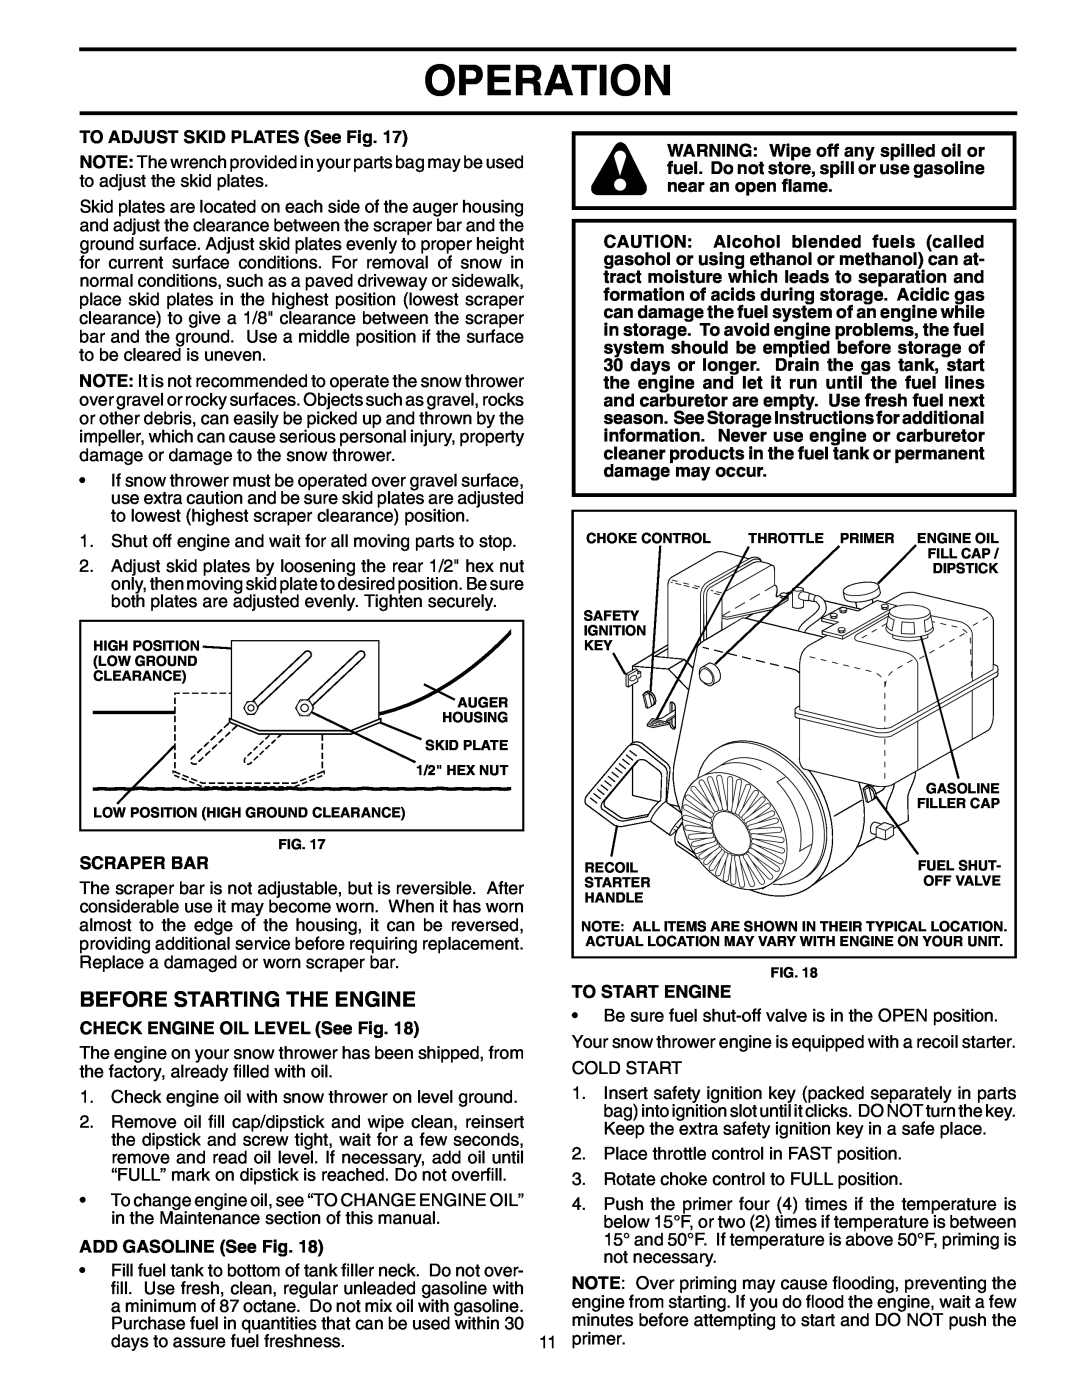 Poulan 199350 Before Starting The Engine, Operation, TO ADJUST SKID PLATES See Fig, Scraper Bar, ADD GASOLINE See Fig 